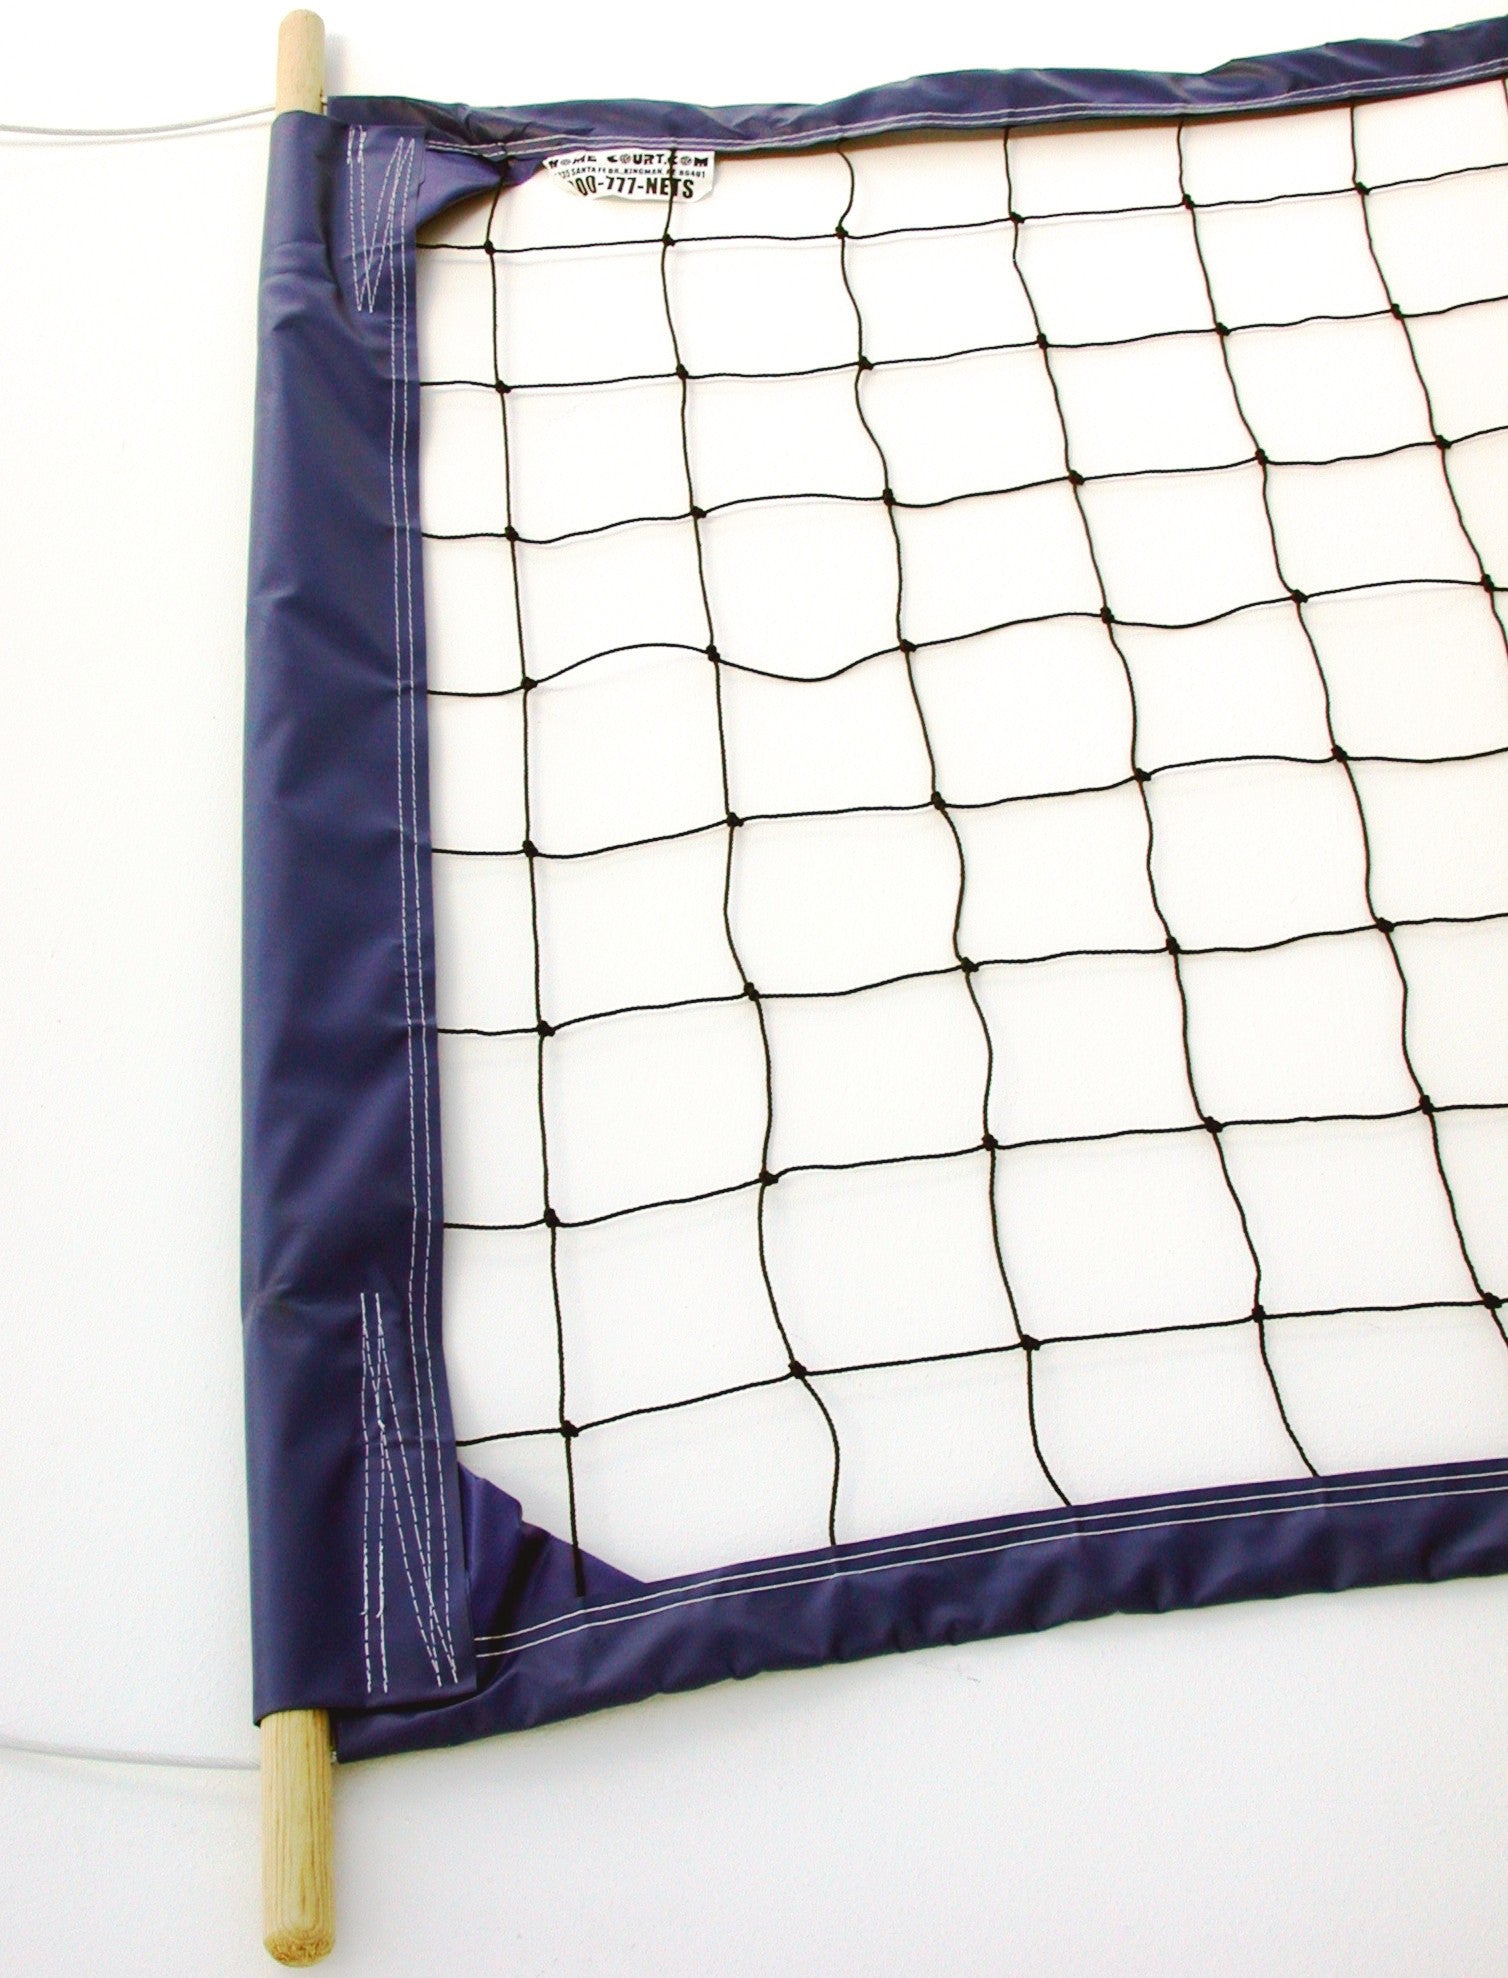 Dowel Rods For Volleyball Nets